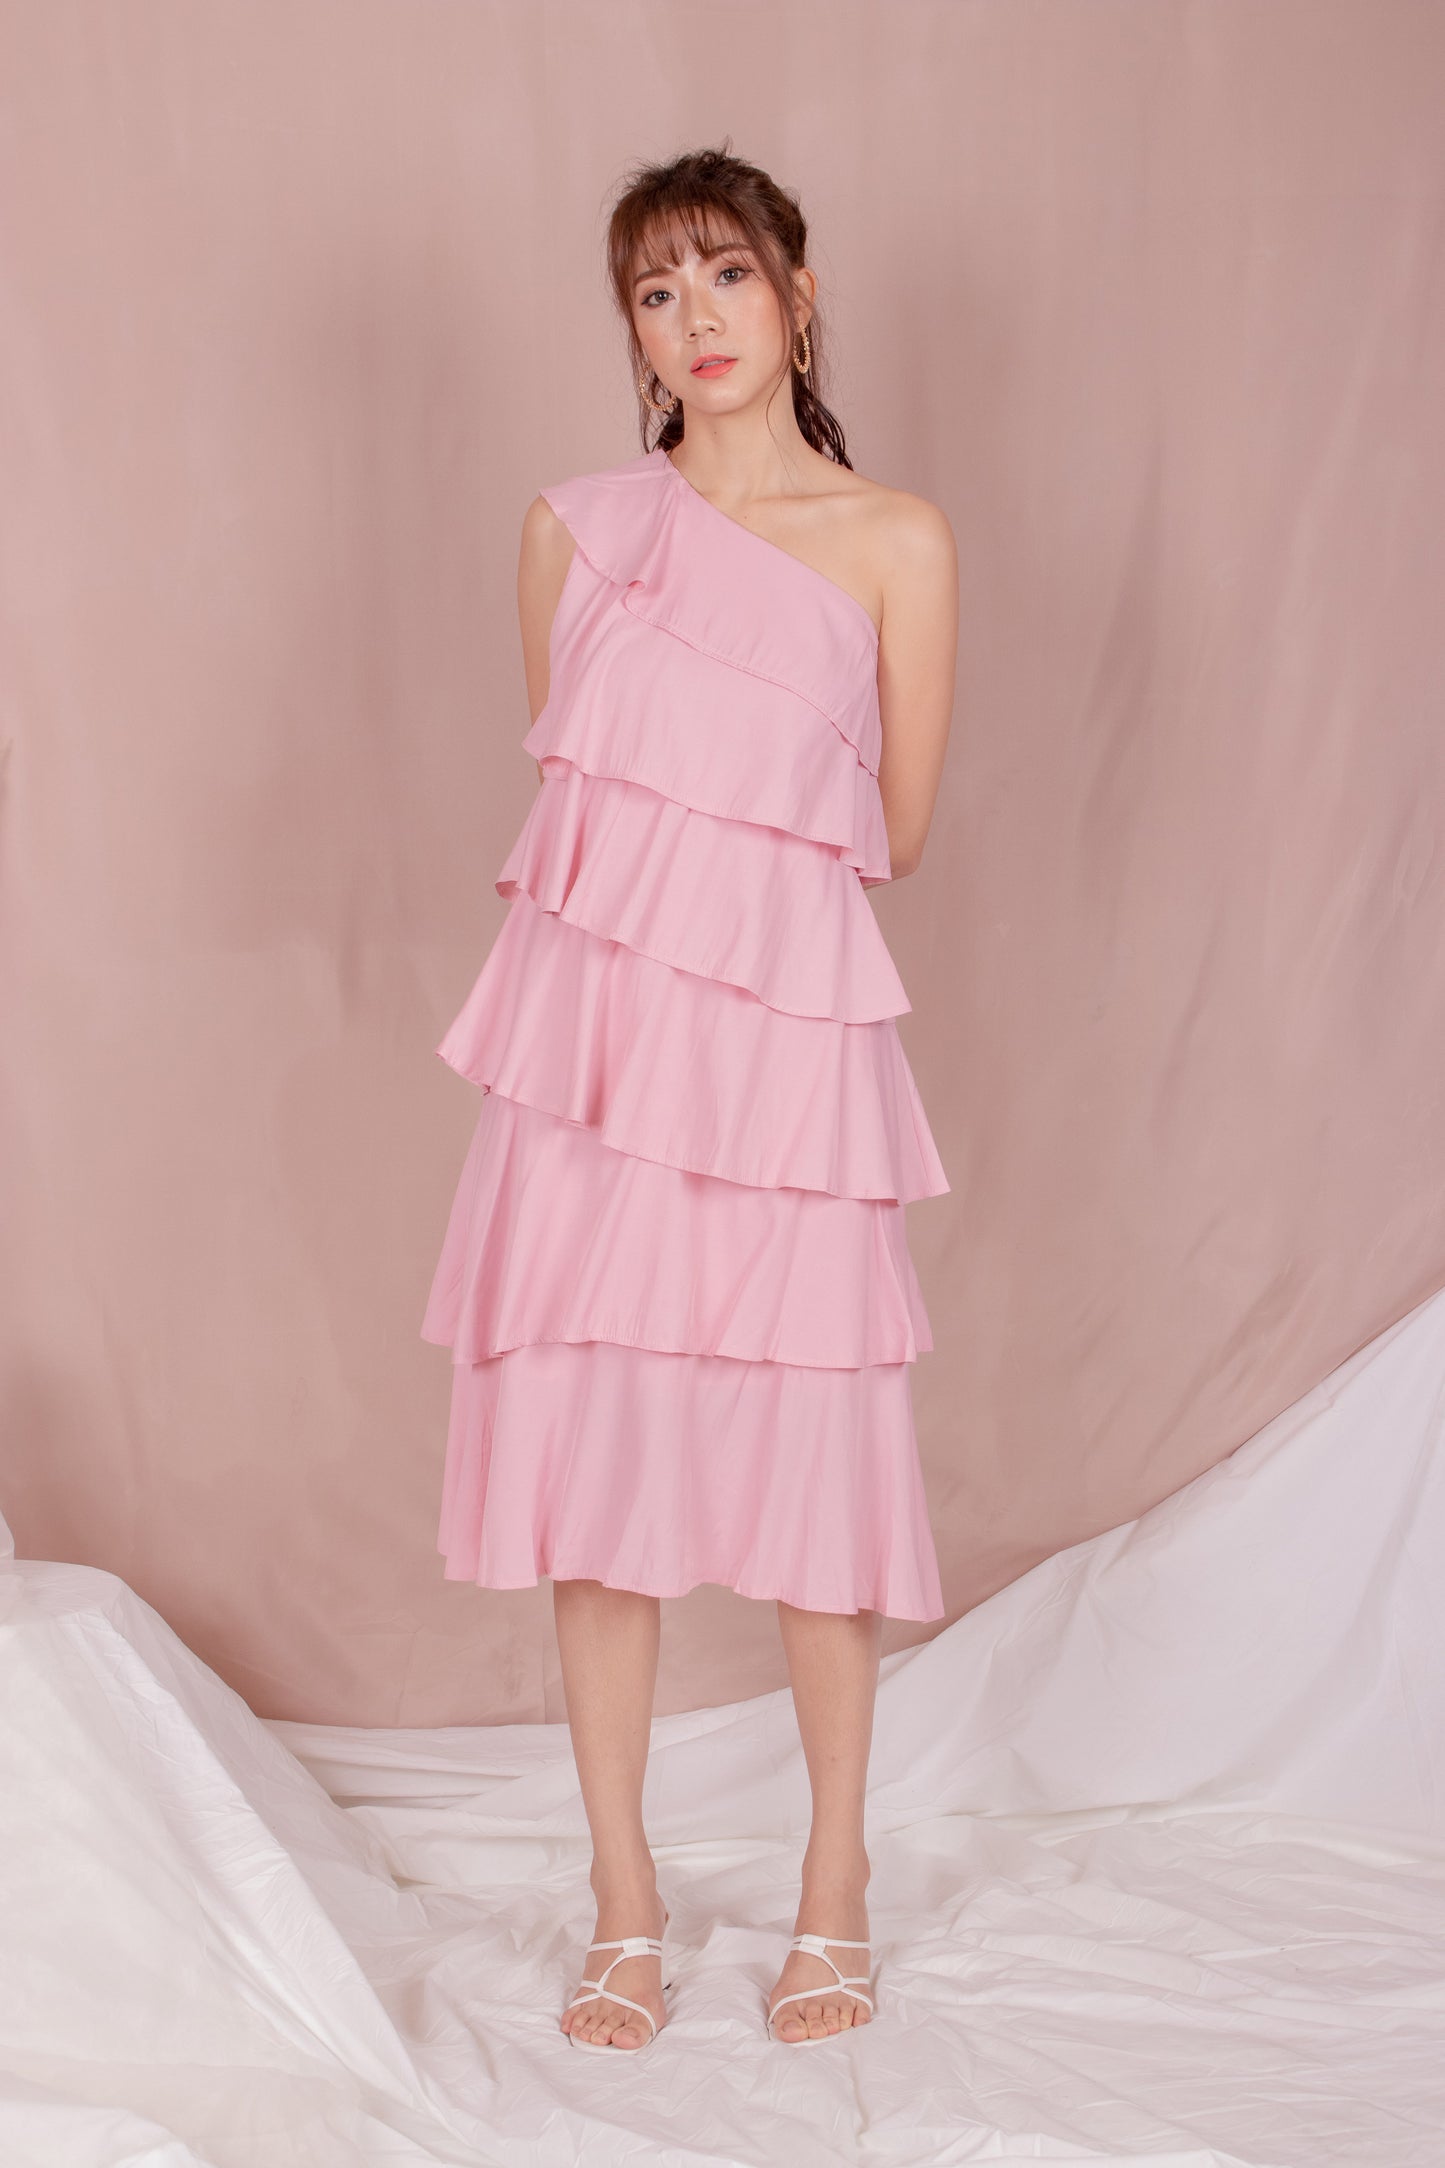 *PREMIUM* - Tilia Layered Dress in Pink - Self Manufactured by LBRLABEL